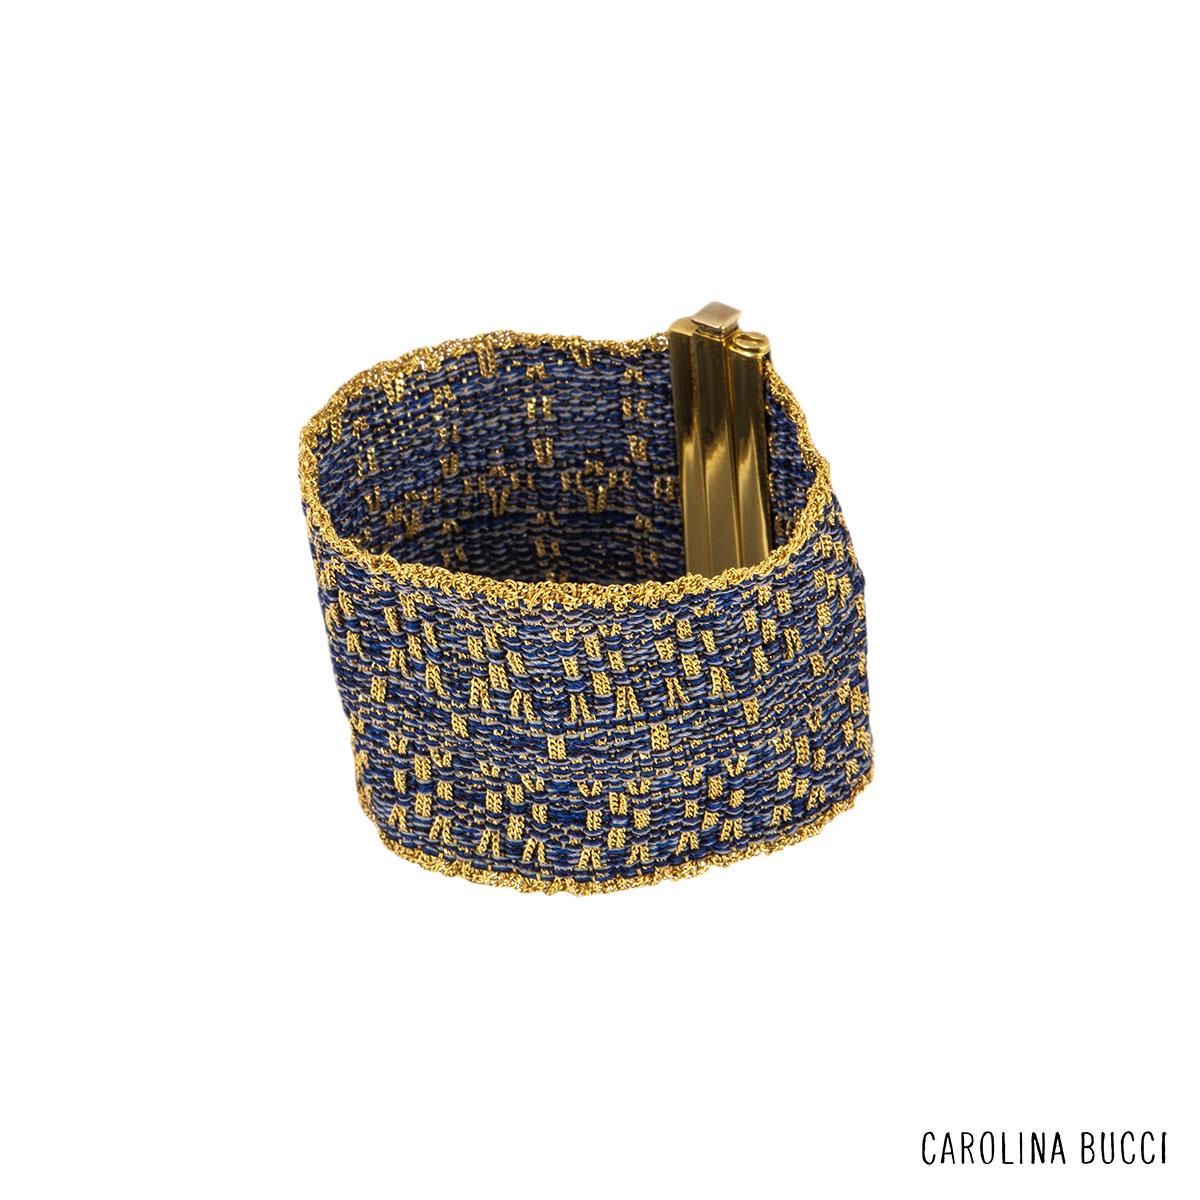 An 18k yellow gold woven mesh bracelet by Carolina Bucci. The bracelet is set with yellow gold chain and silk thread intertwined which each other in a patterned design. The bracelet features a push down bar clasp with a length of 6 inches with a